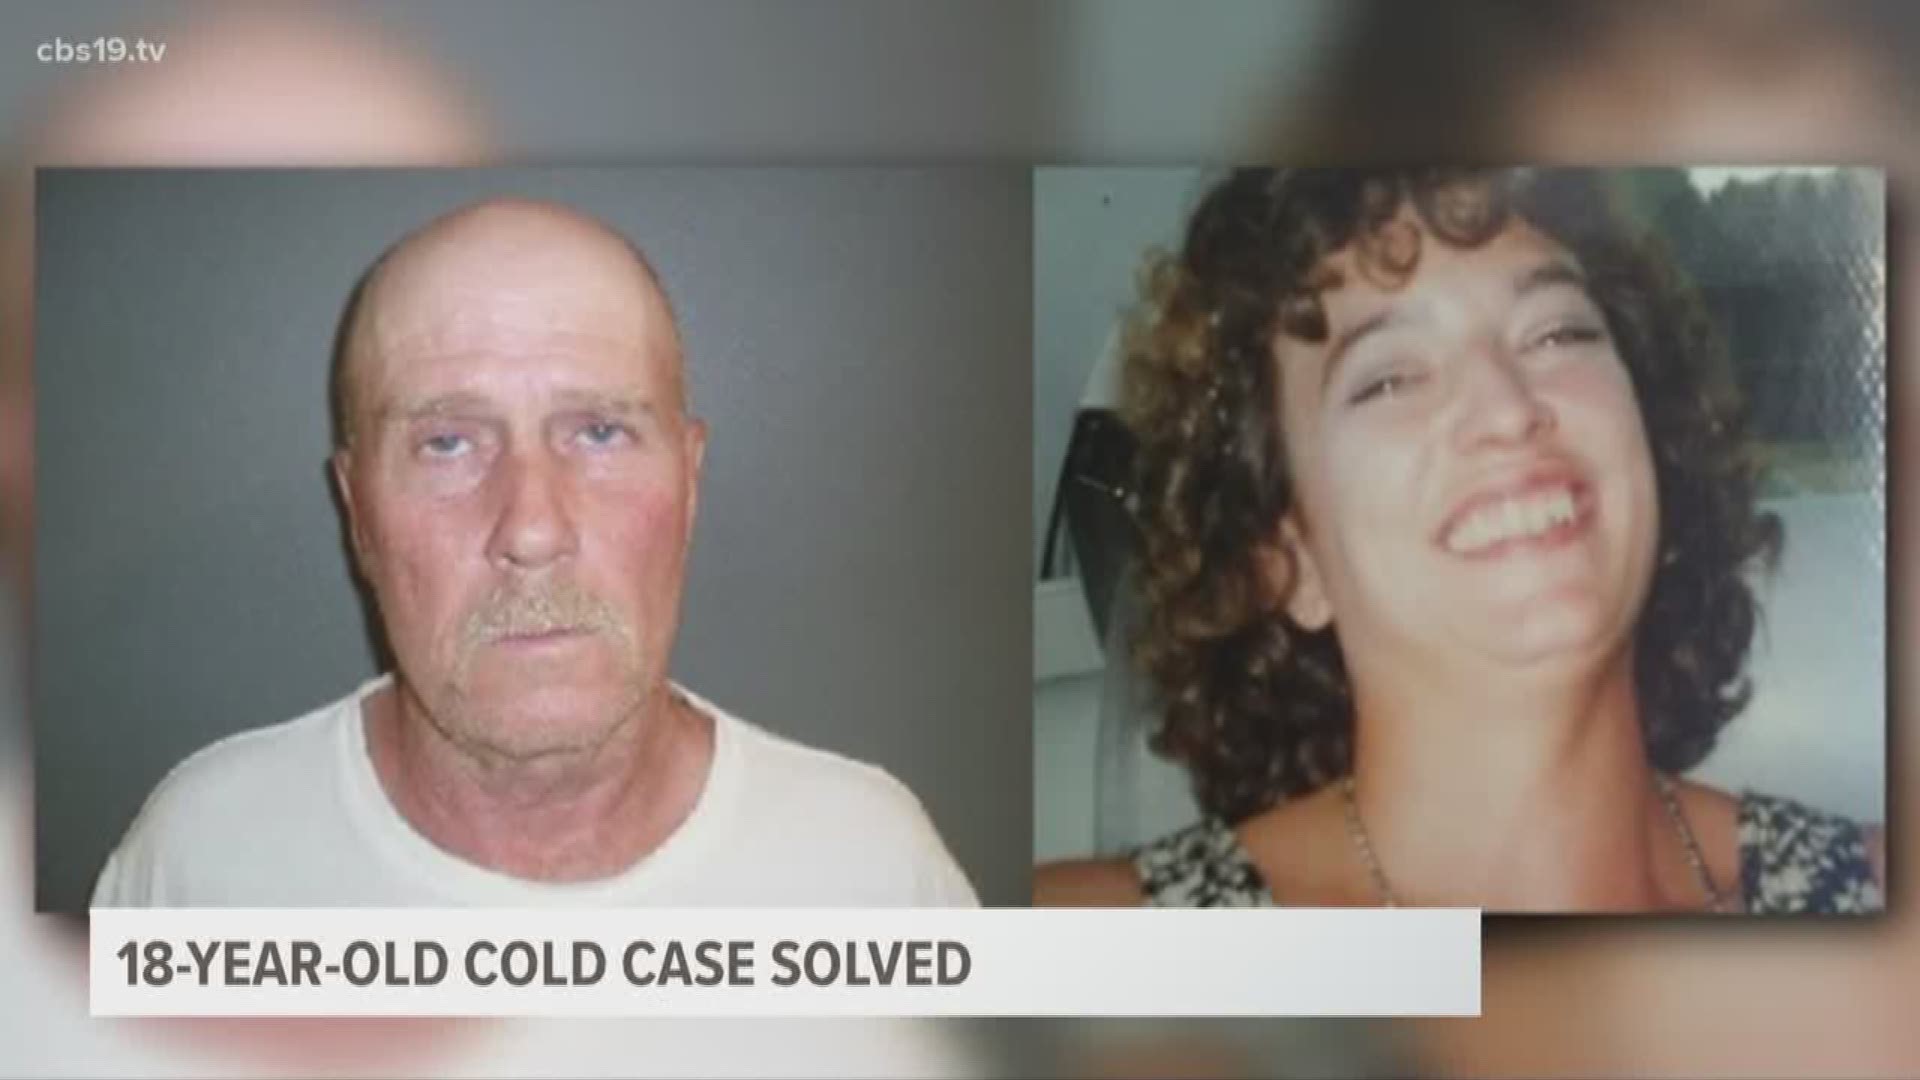 Arrest made in 18-year-old Houston Co. cold case